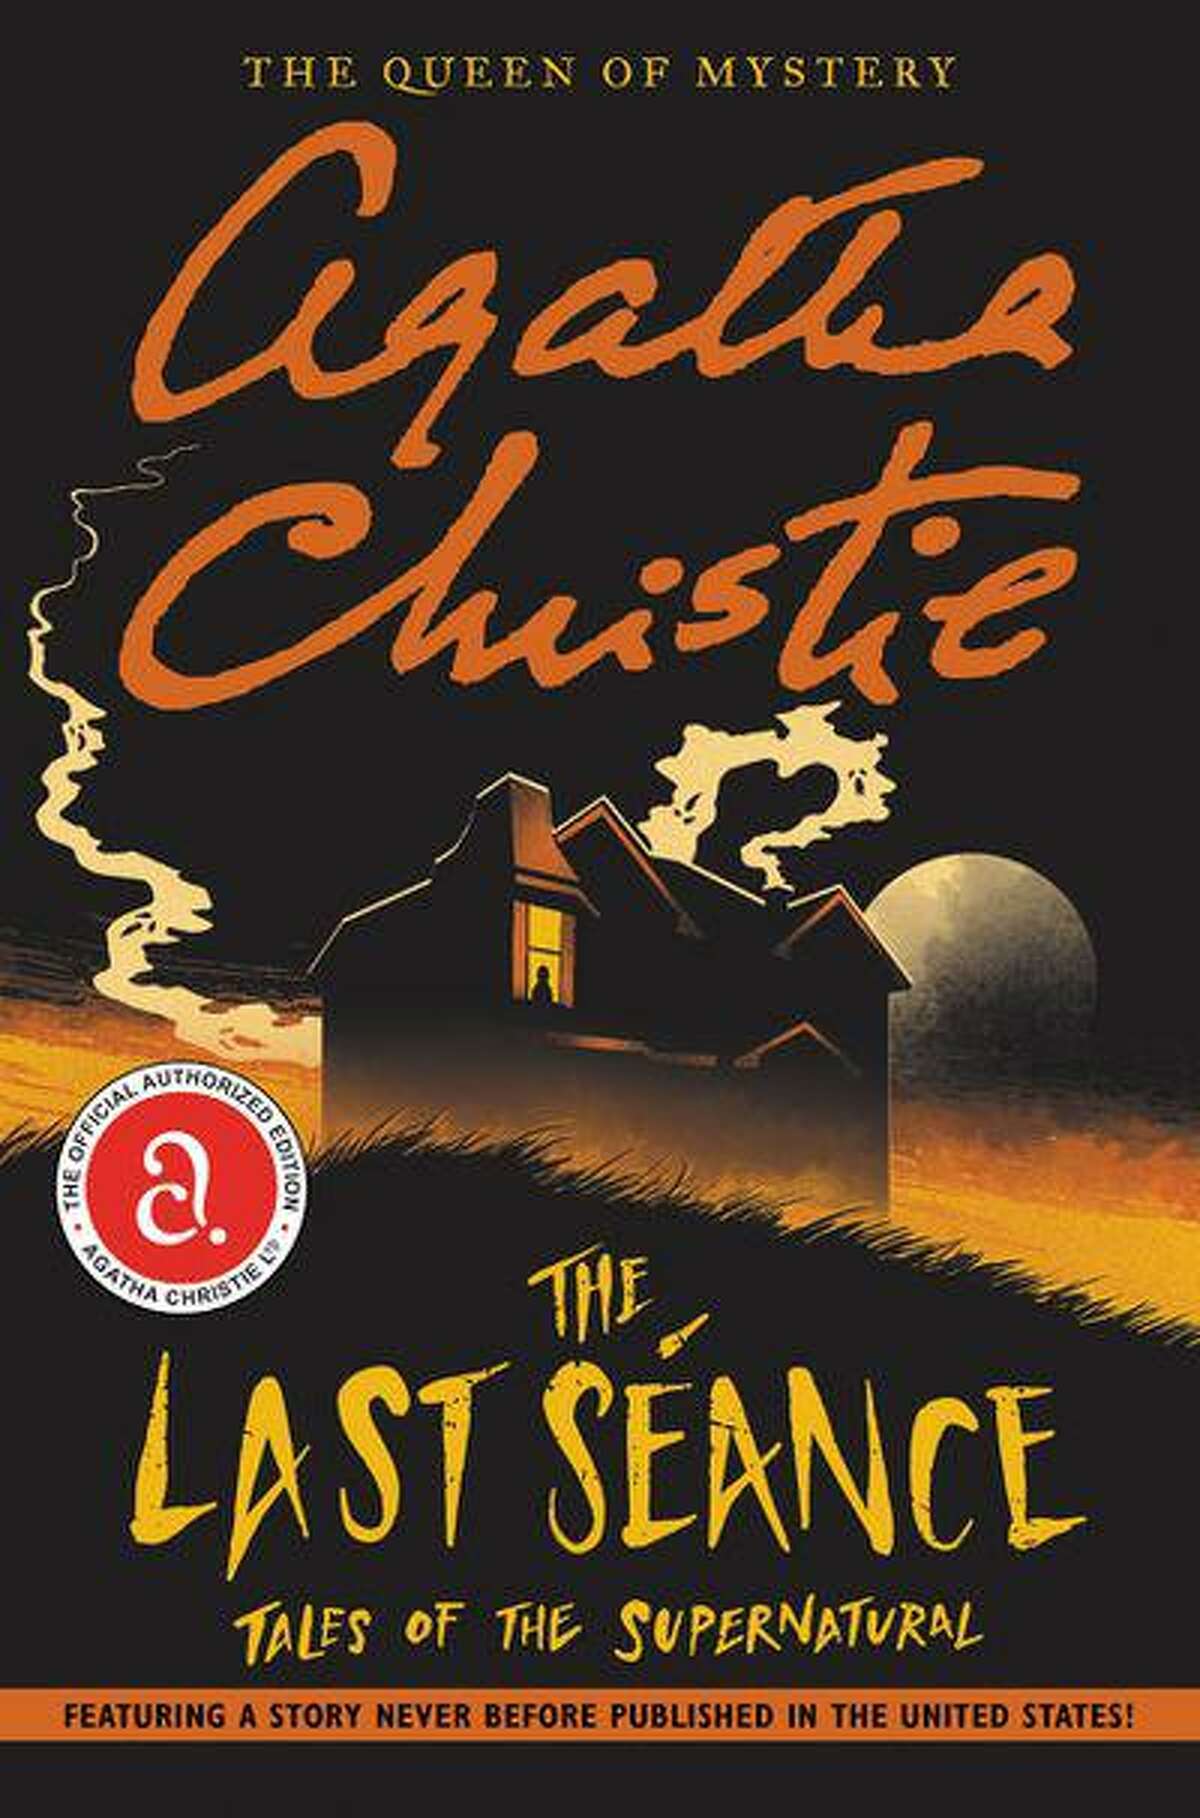 "The Last Séance" by Agatha Christie is great for Halloween thrills.